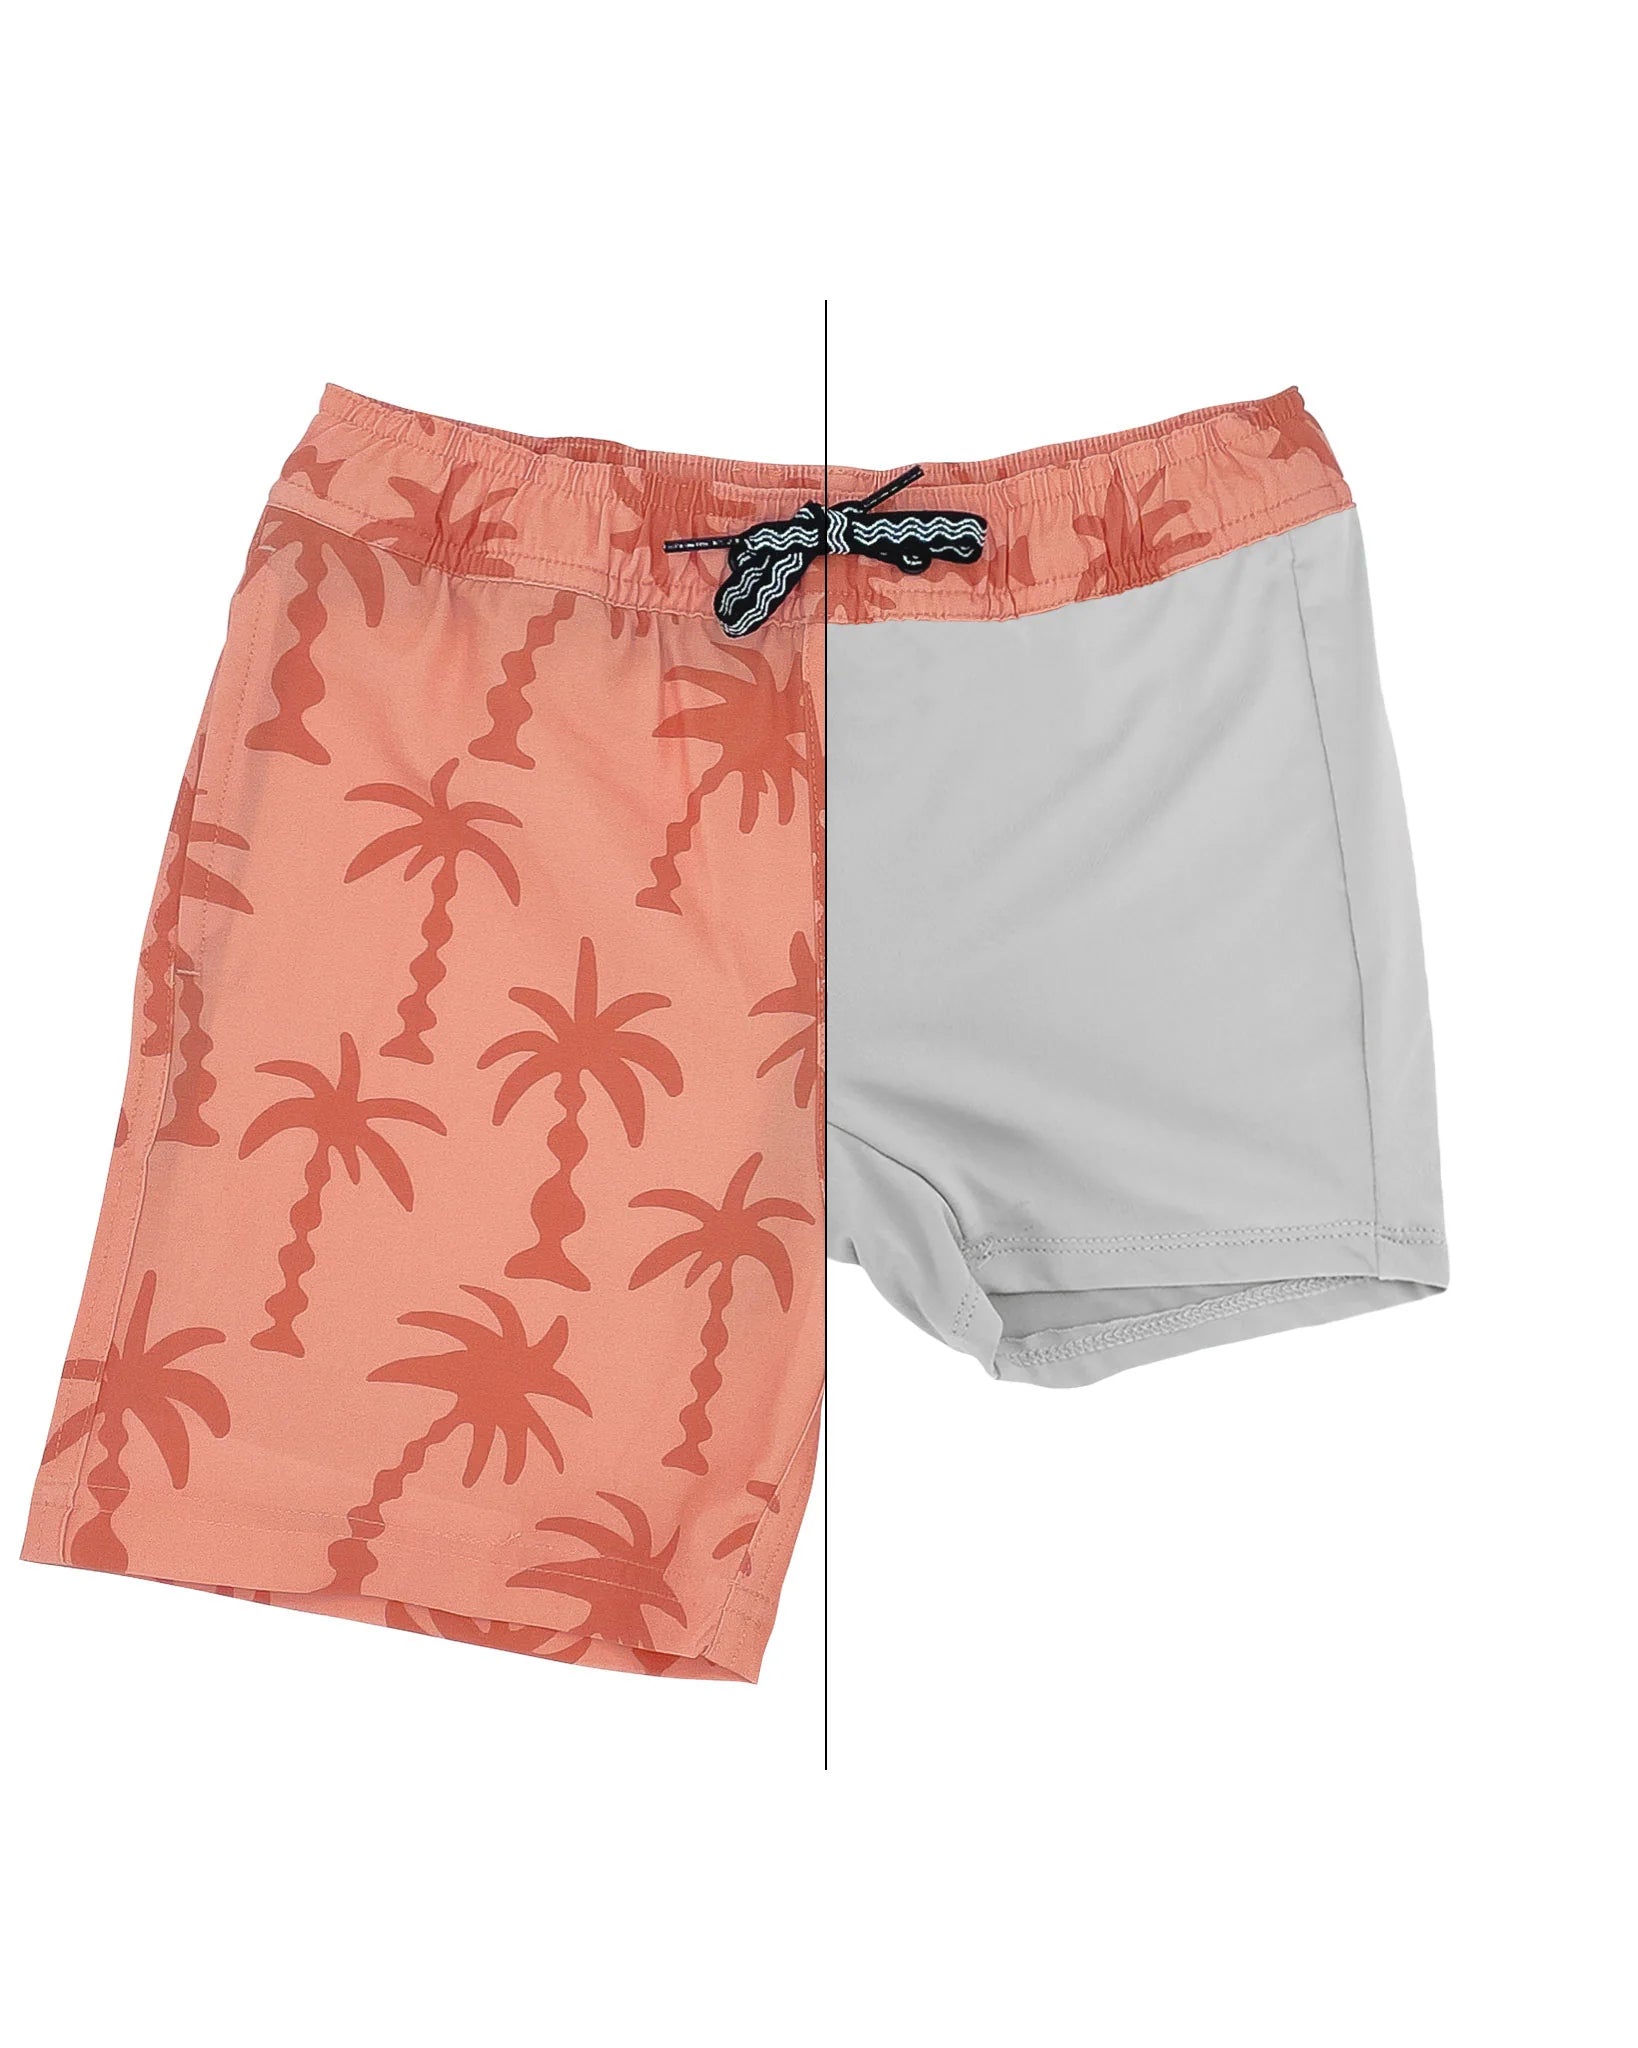 Wavy Palm Volley Trunks  - Doodlebug's Children's Boutique